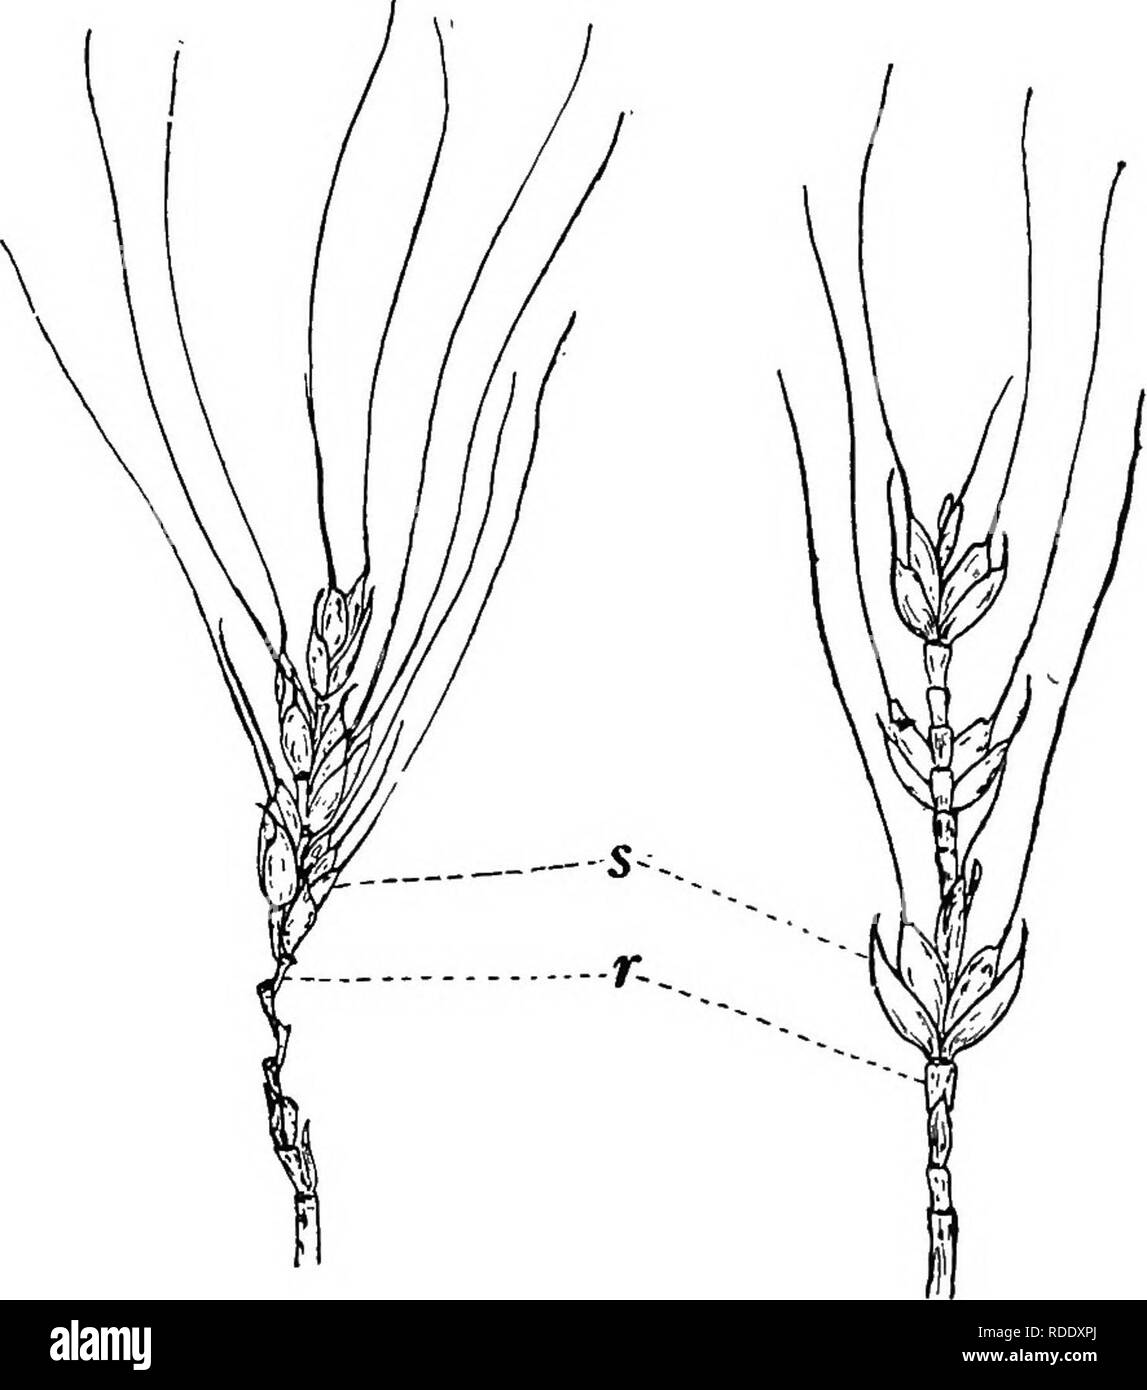 . Botany for agricultural students . Botany. Fig. 18. — Spikelet of the Oat head, with the bracts spread apart to show the flowers. There are three flowers, only (1) and (S) of which develop and produce kernels, e, glumes or empty glumes; /, lemma or flowering glume; pa, palea; s, stamens; p, pistil; r, rachilla. The parts of flowers (S) and (S) are not indicated. Many times enlarged.. Fig. 19. — Two views of a head of Wheat with some spikelets removed to show the zig-zag rachis. An edge view of the spikelets is shown at the left and a side view at the right, r, ra,chis; s, spikelets.. Please  Stock Photo